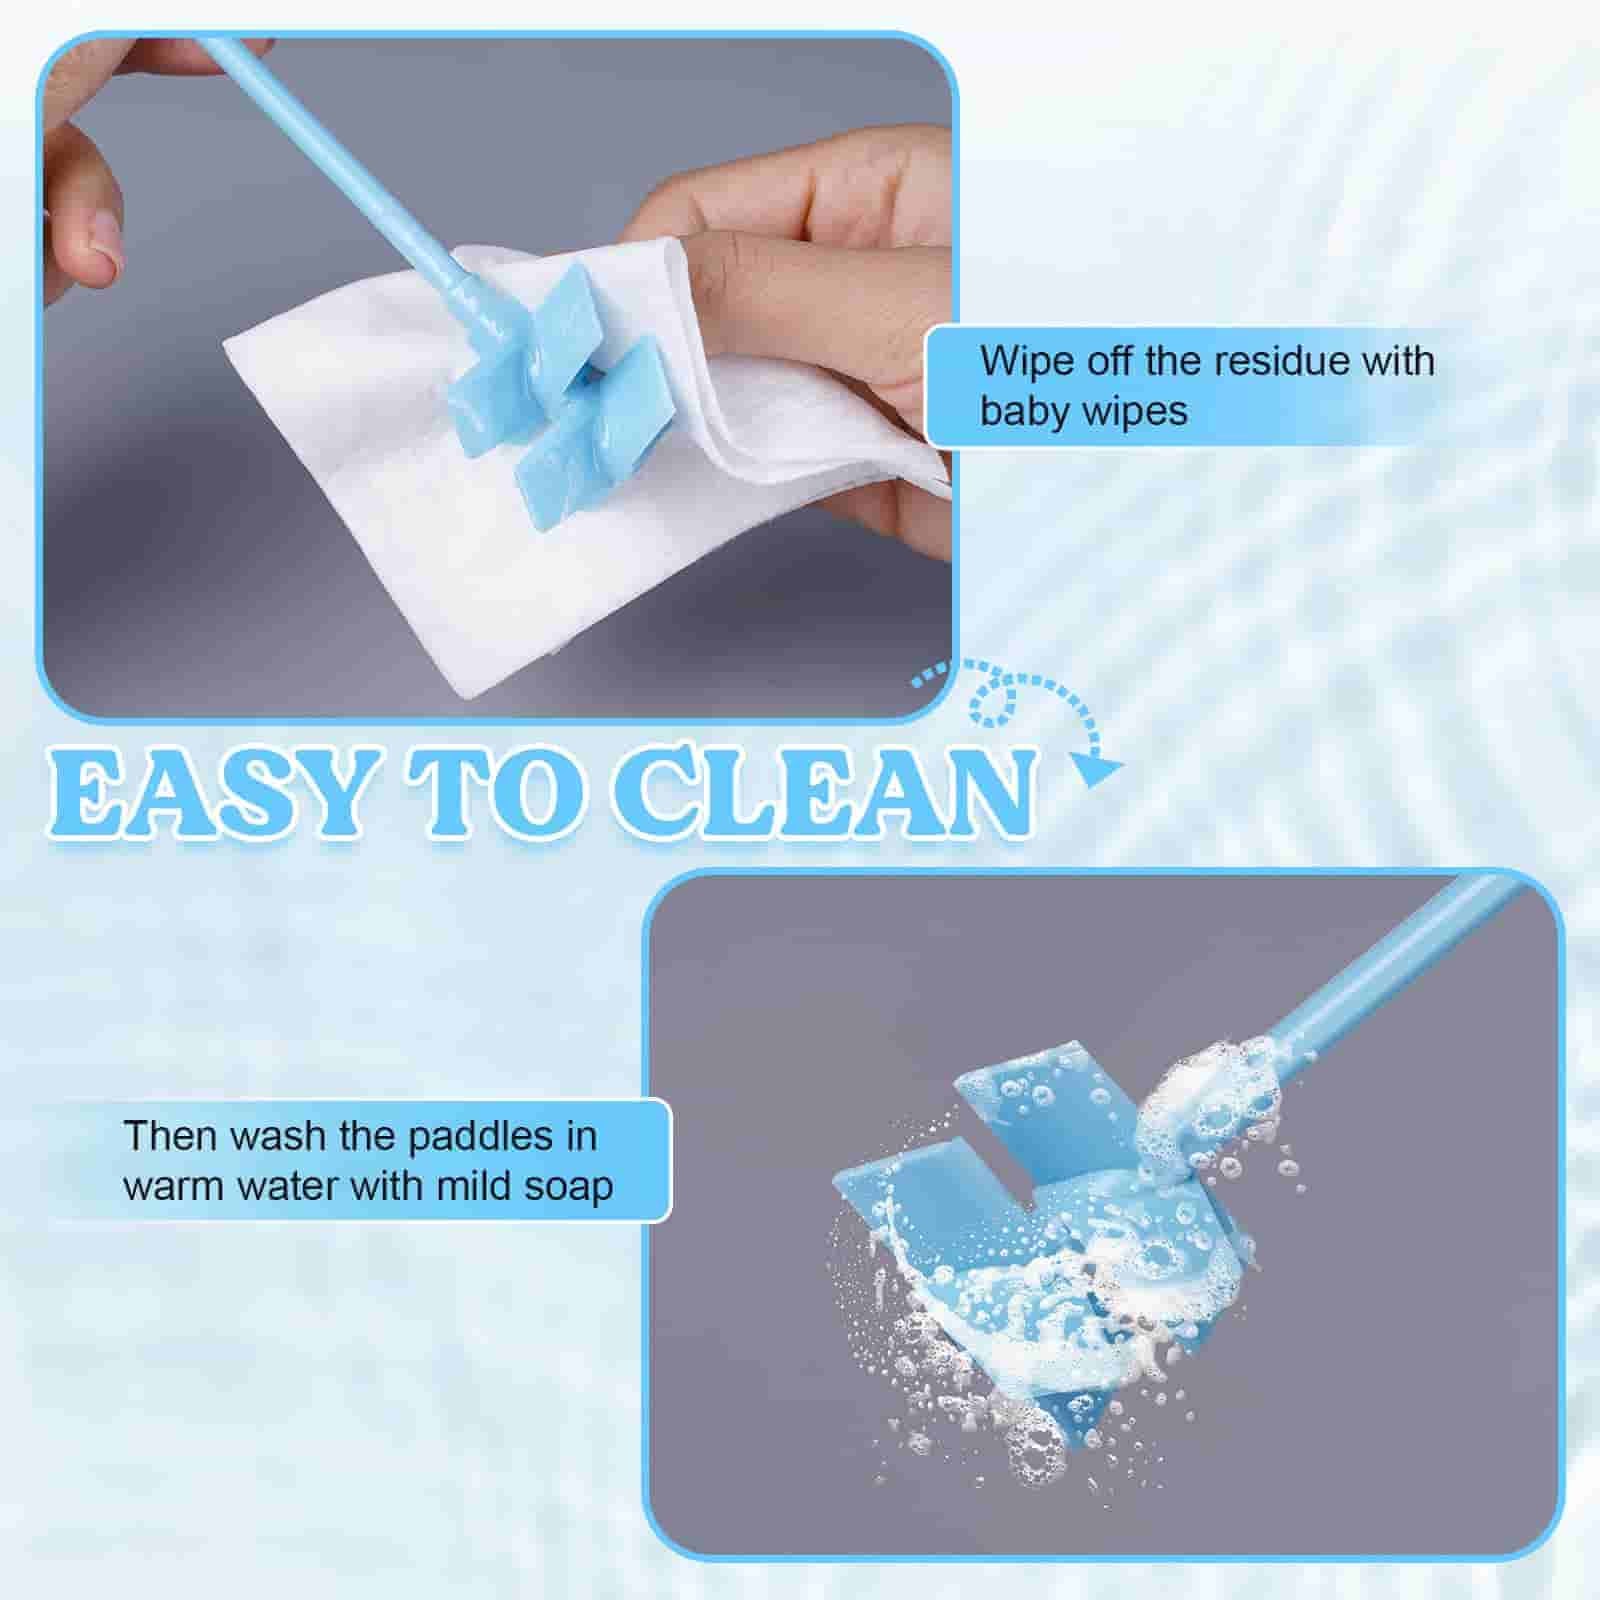 mixer paddles easy to clean, wipe off the residue with baby wipes, then wash the paddles in warm water with mild soap